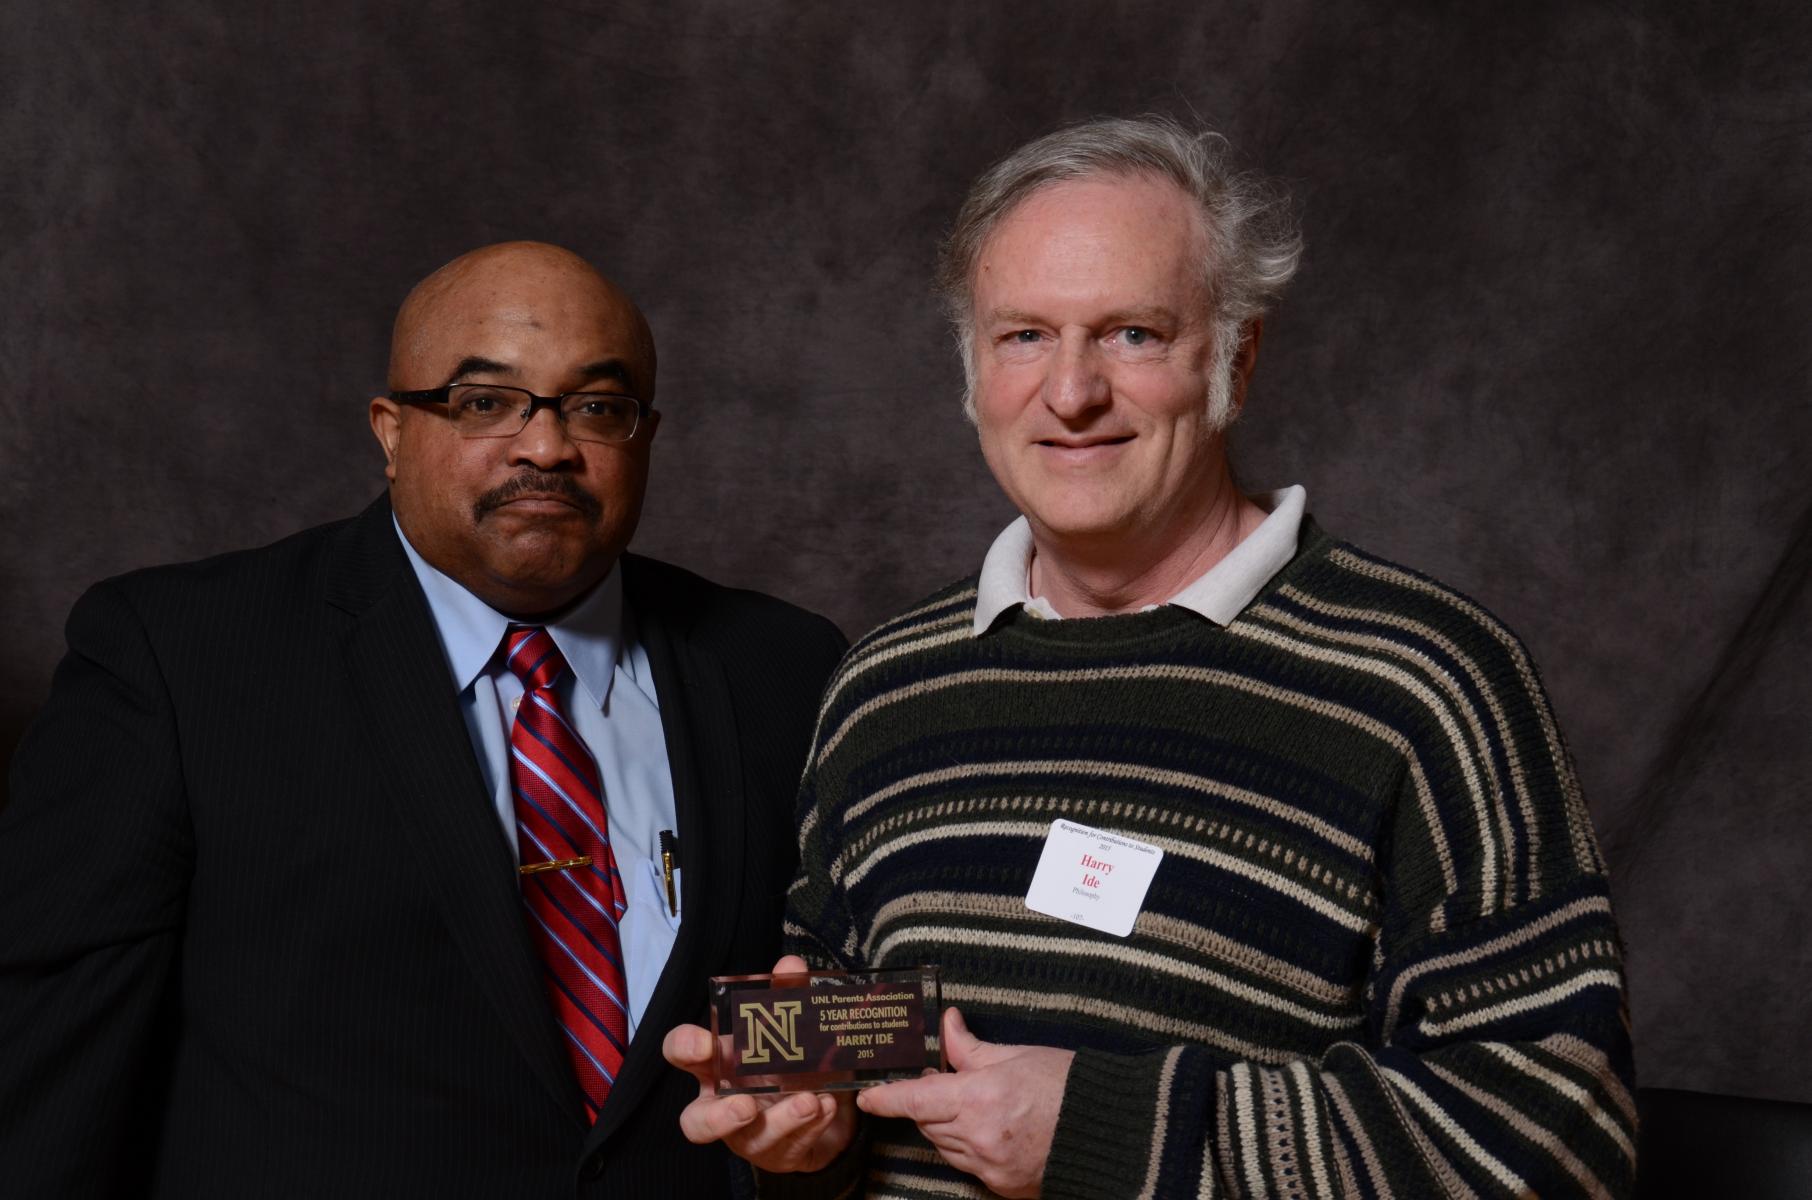 Harry Ide receiving his award at the 2015 UNL Parents Recognition Ceremony